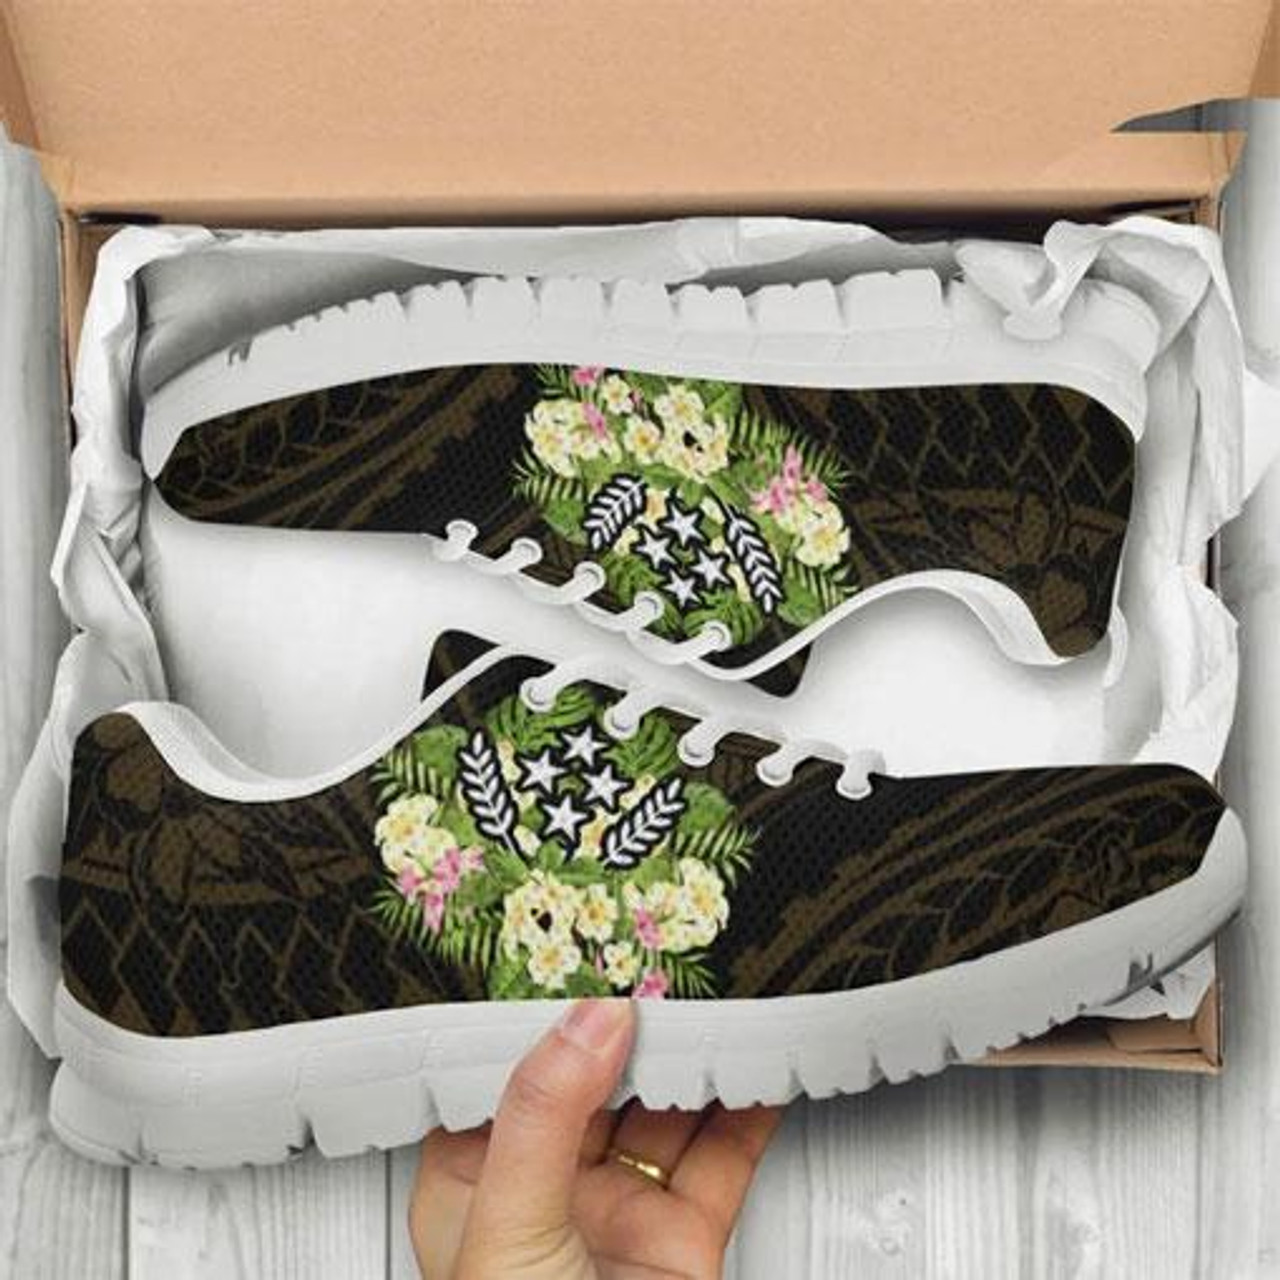 Kosrae State Sneakers - Polynesian Gold Patterns Collection 10